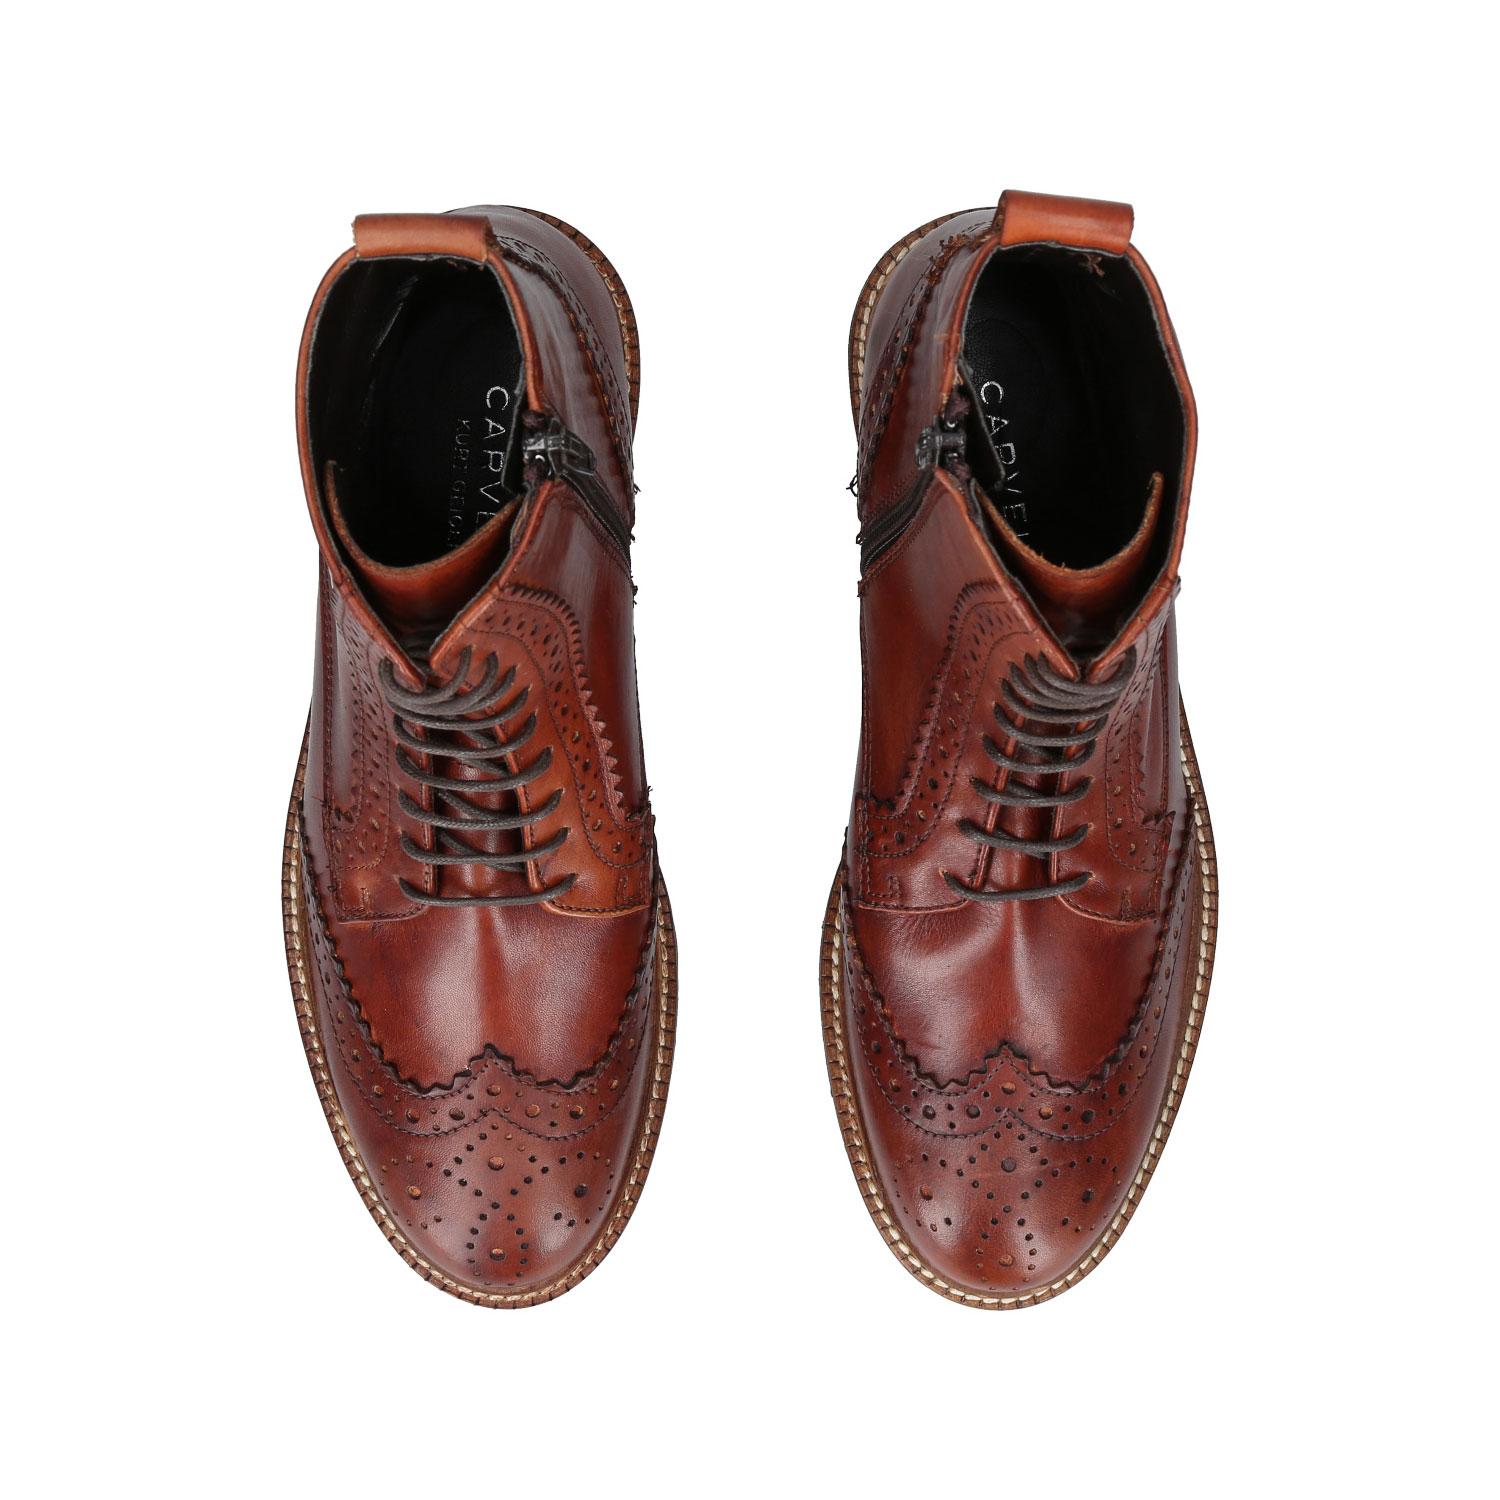 Snail Brogue Lace-Up Boots